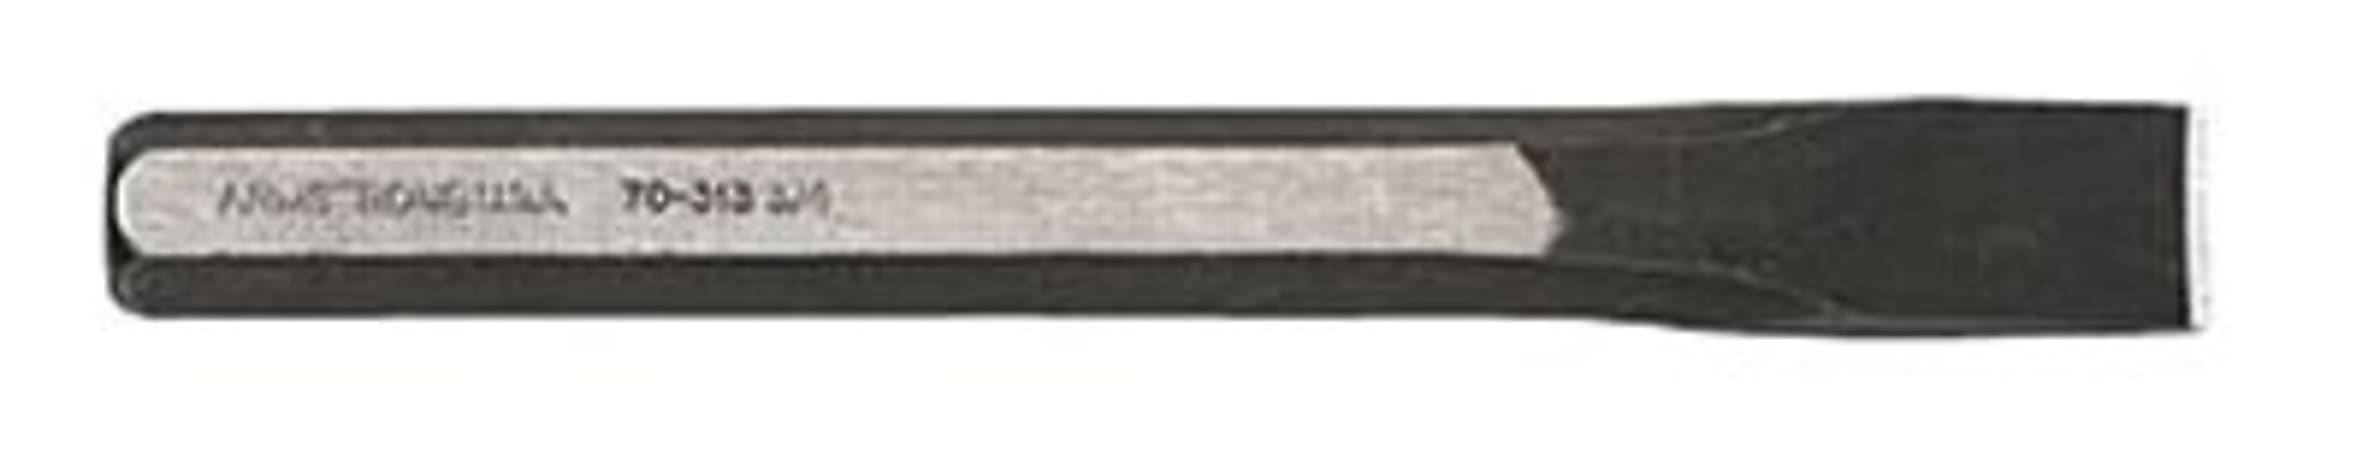 Armstrong Tools Standard-Length Cold Chisel, 1/2"